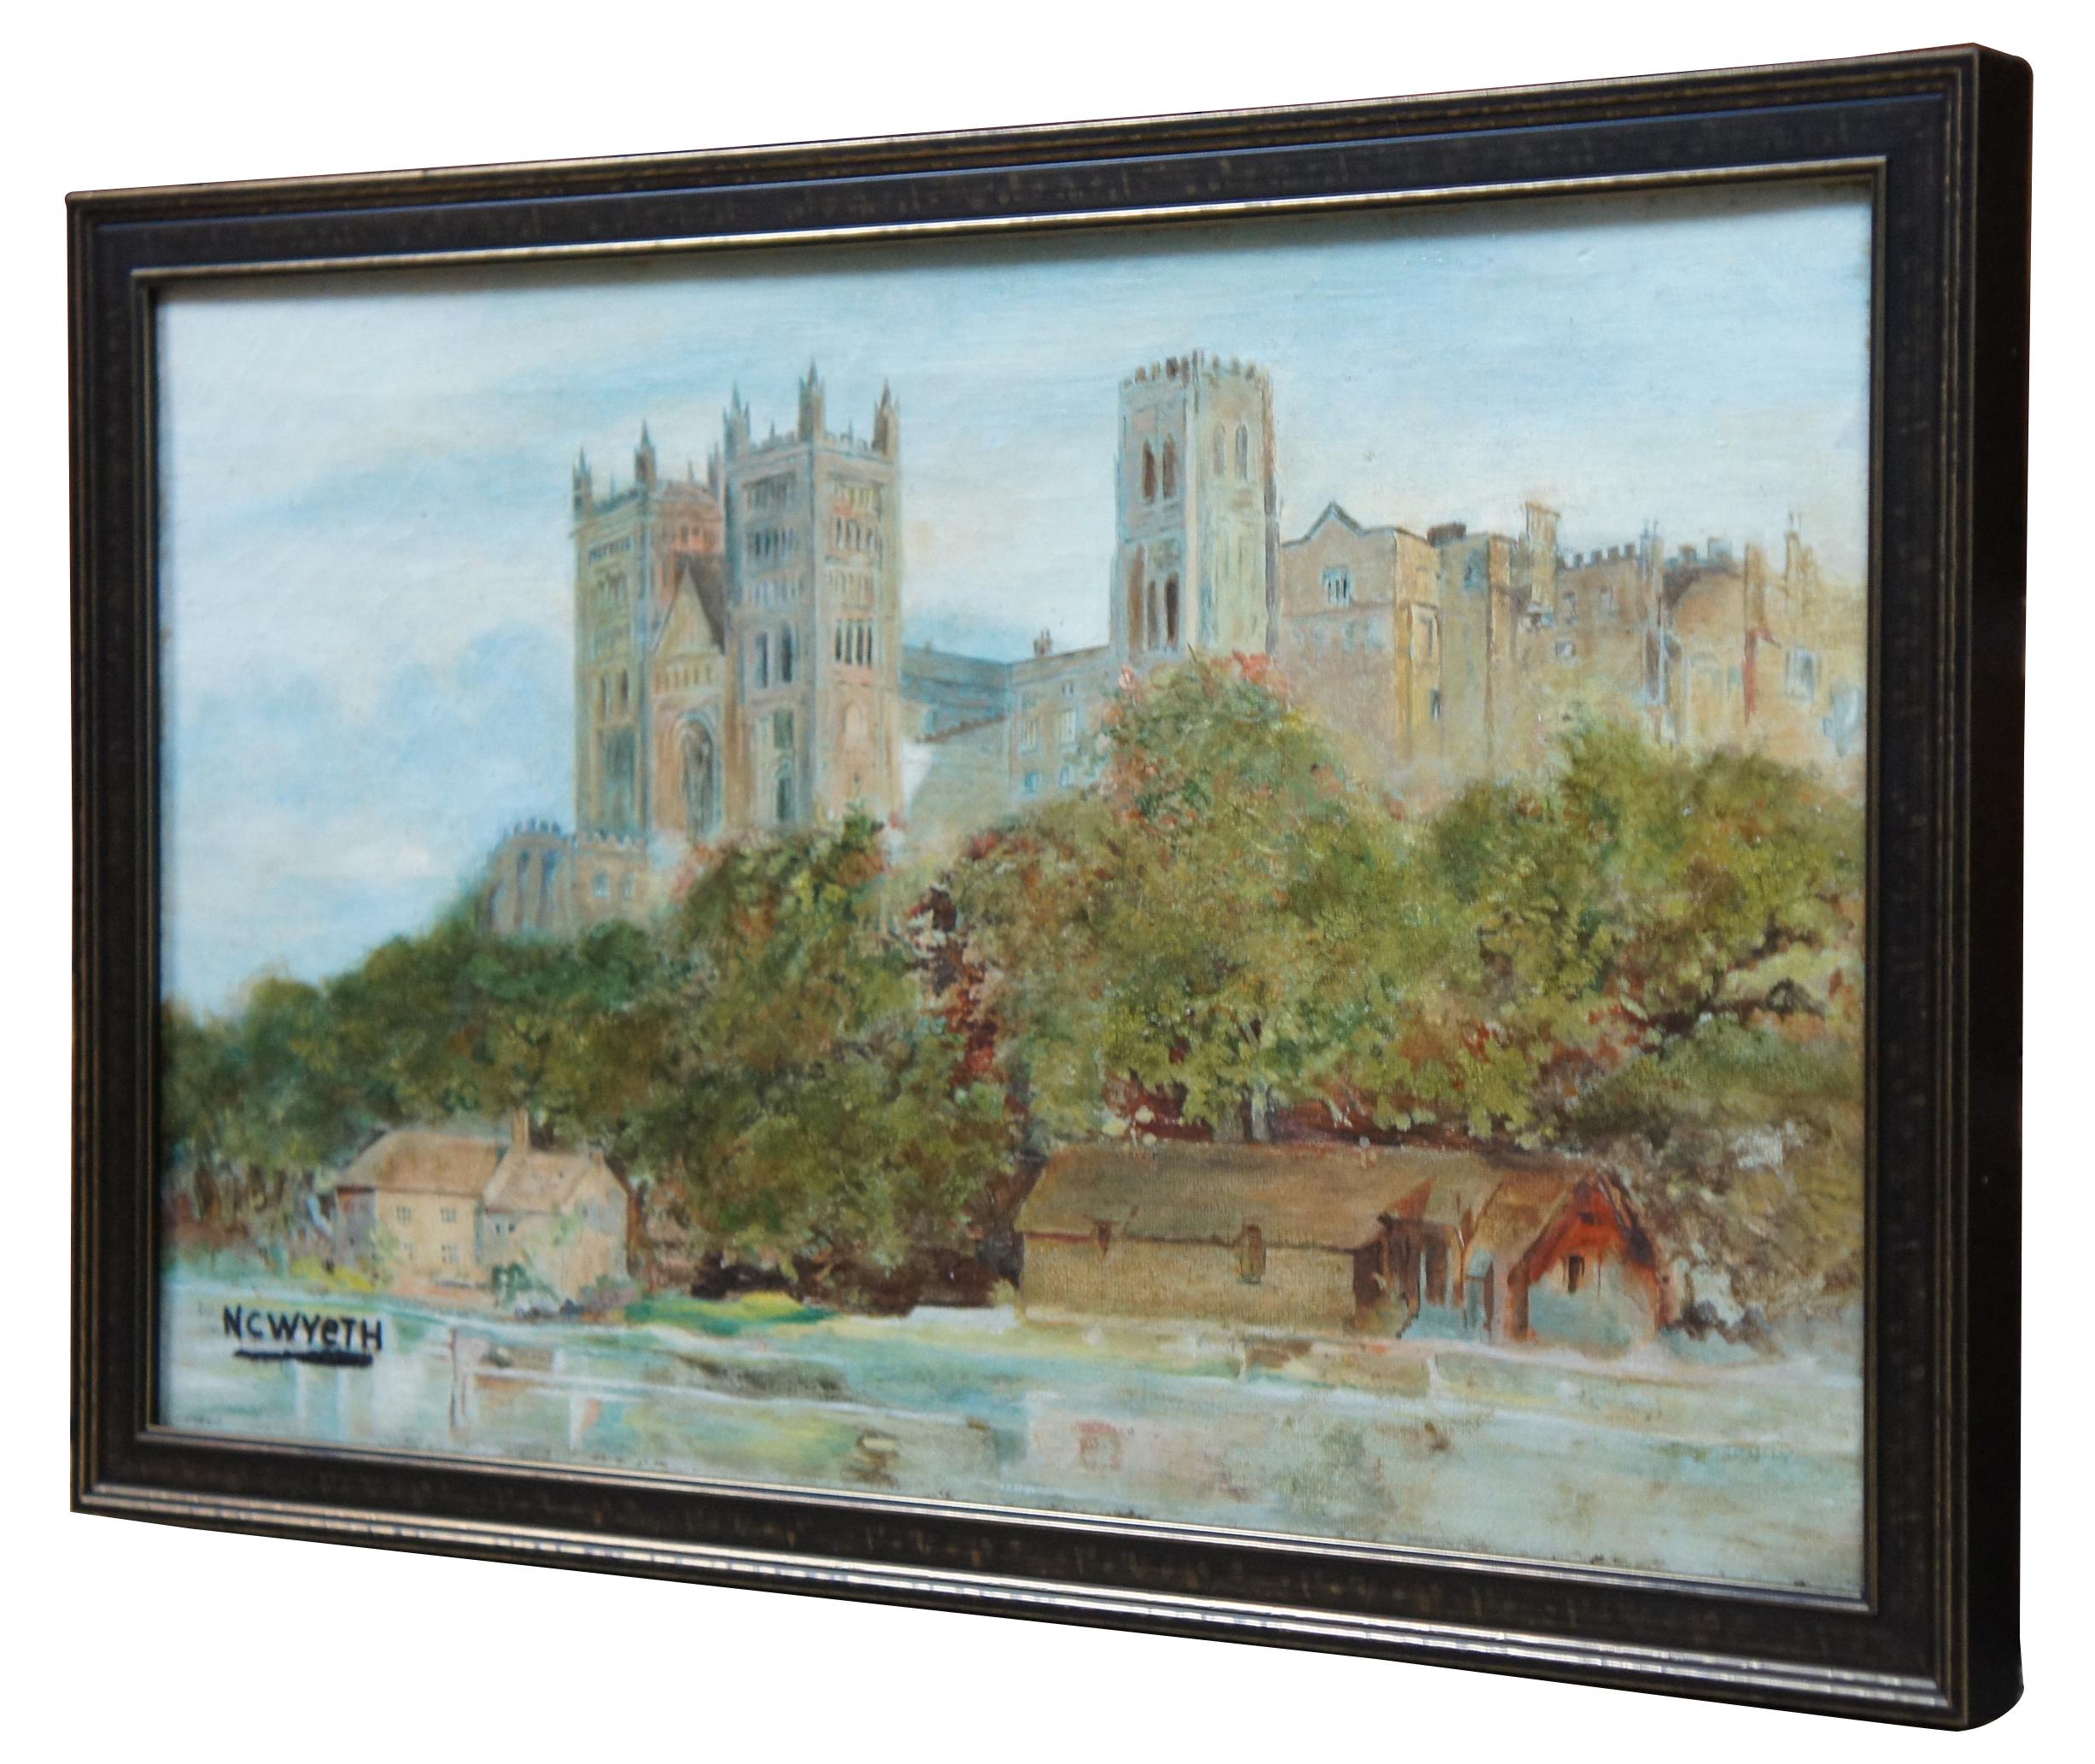 Early 20th century landscape painting of the Durham Cathedral in England, signed lower left. Attributed to N.C. Wyeth (b,1882-1945). Features Gothic or Romanesque inspired (Norman) architecture along the bend of the River Wear with the Mill House.